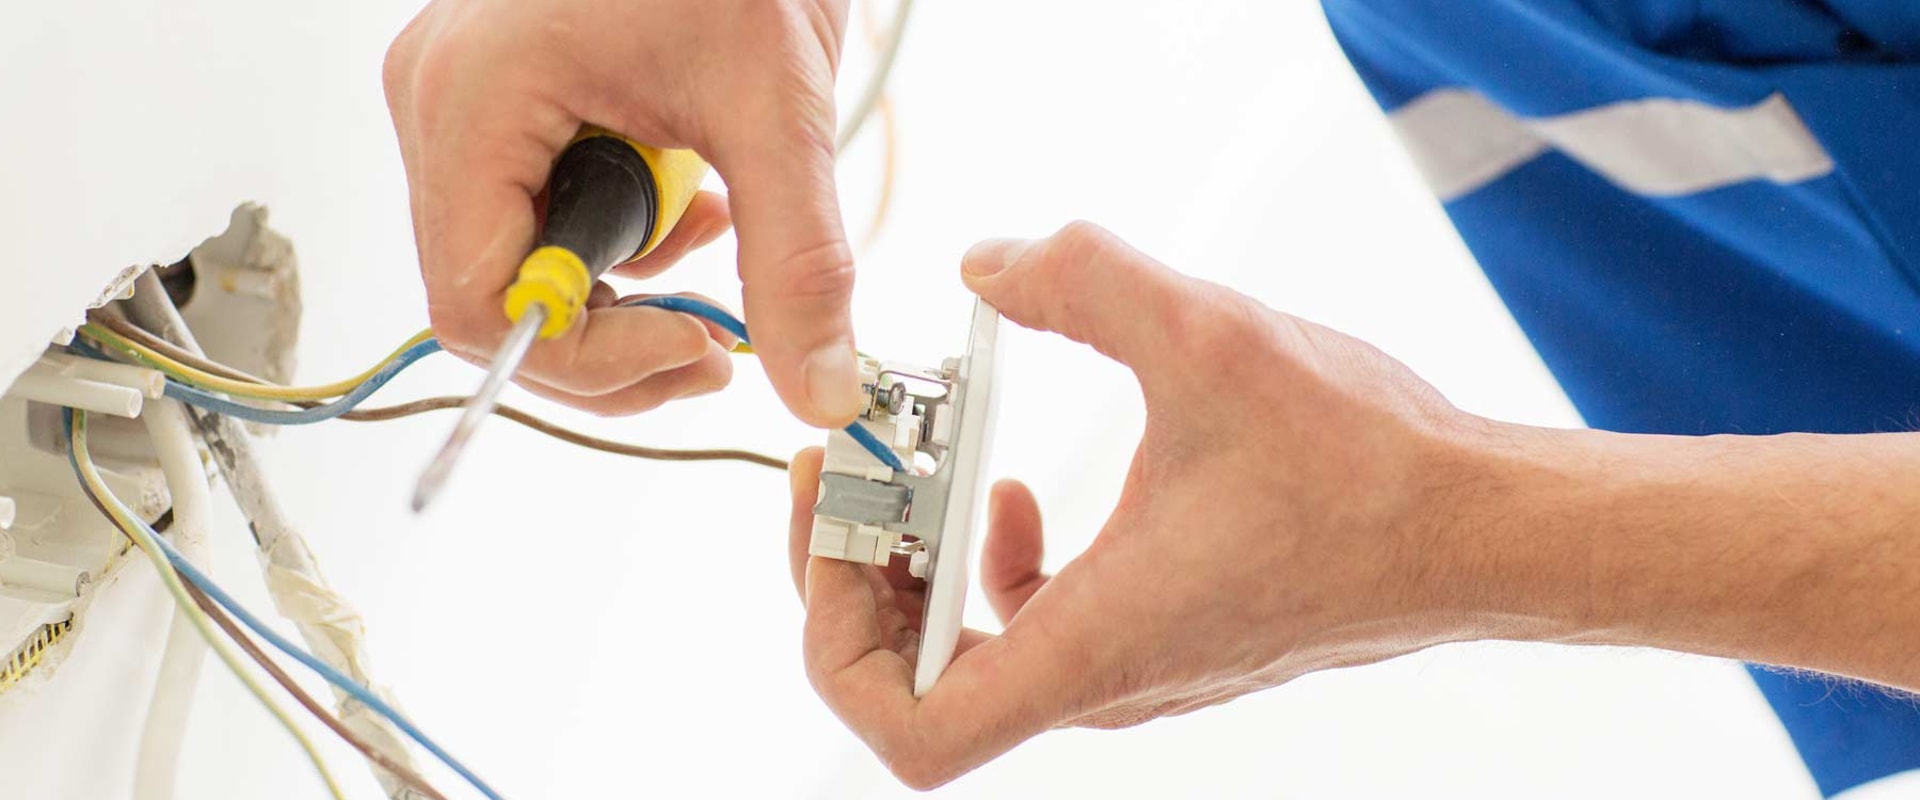 Electrical Wiring Repair Services - All You Need to Know